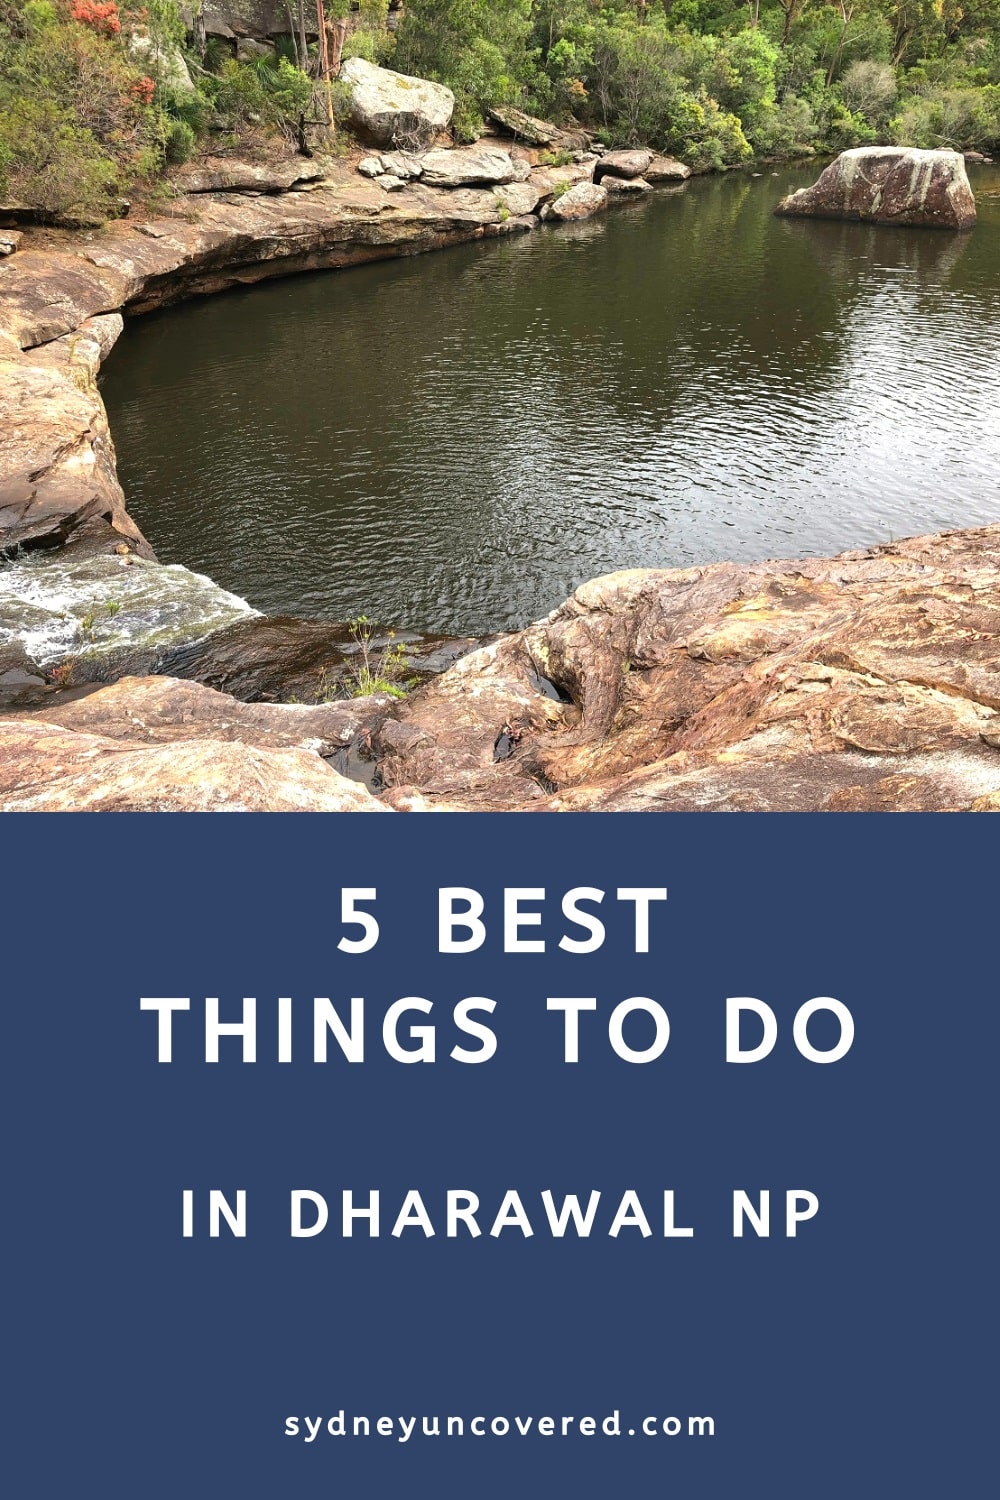 5 Best things to do in Dharawal National Park